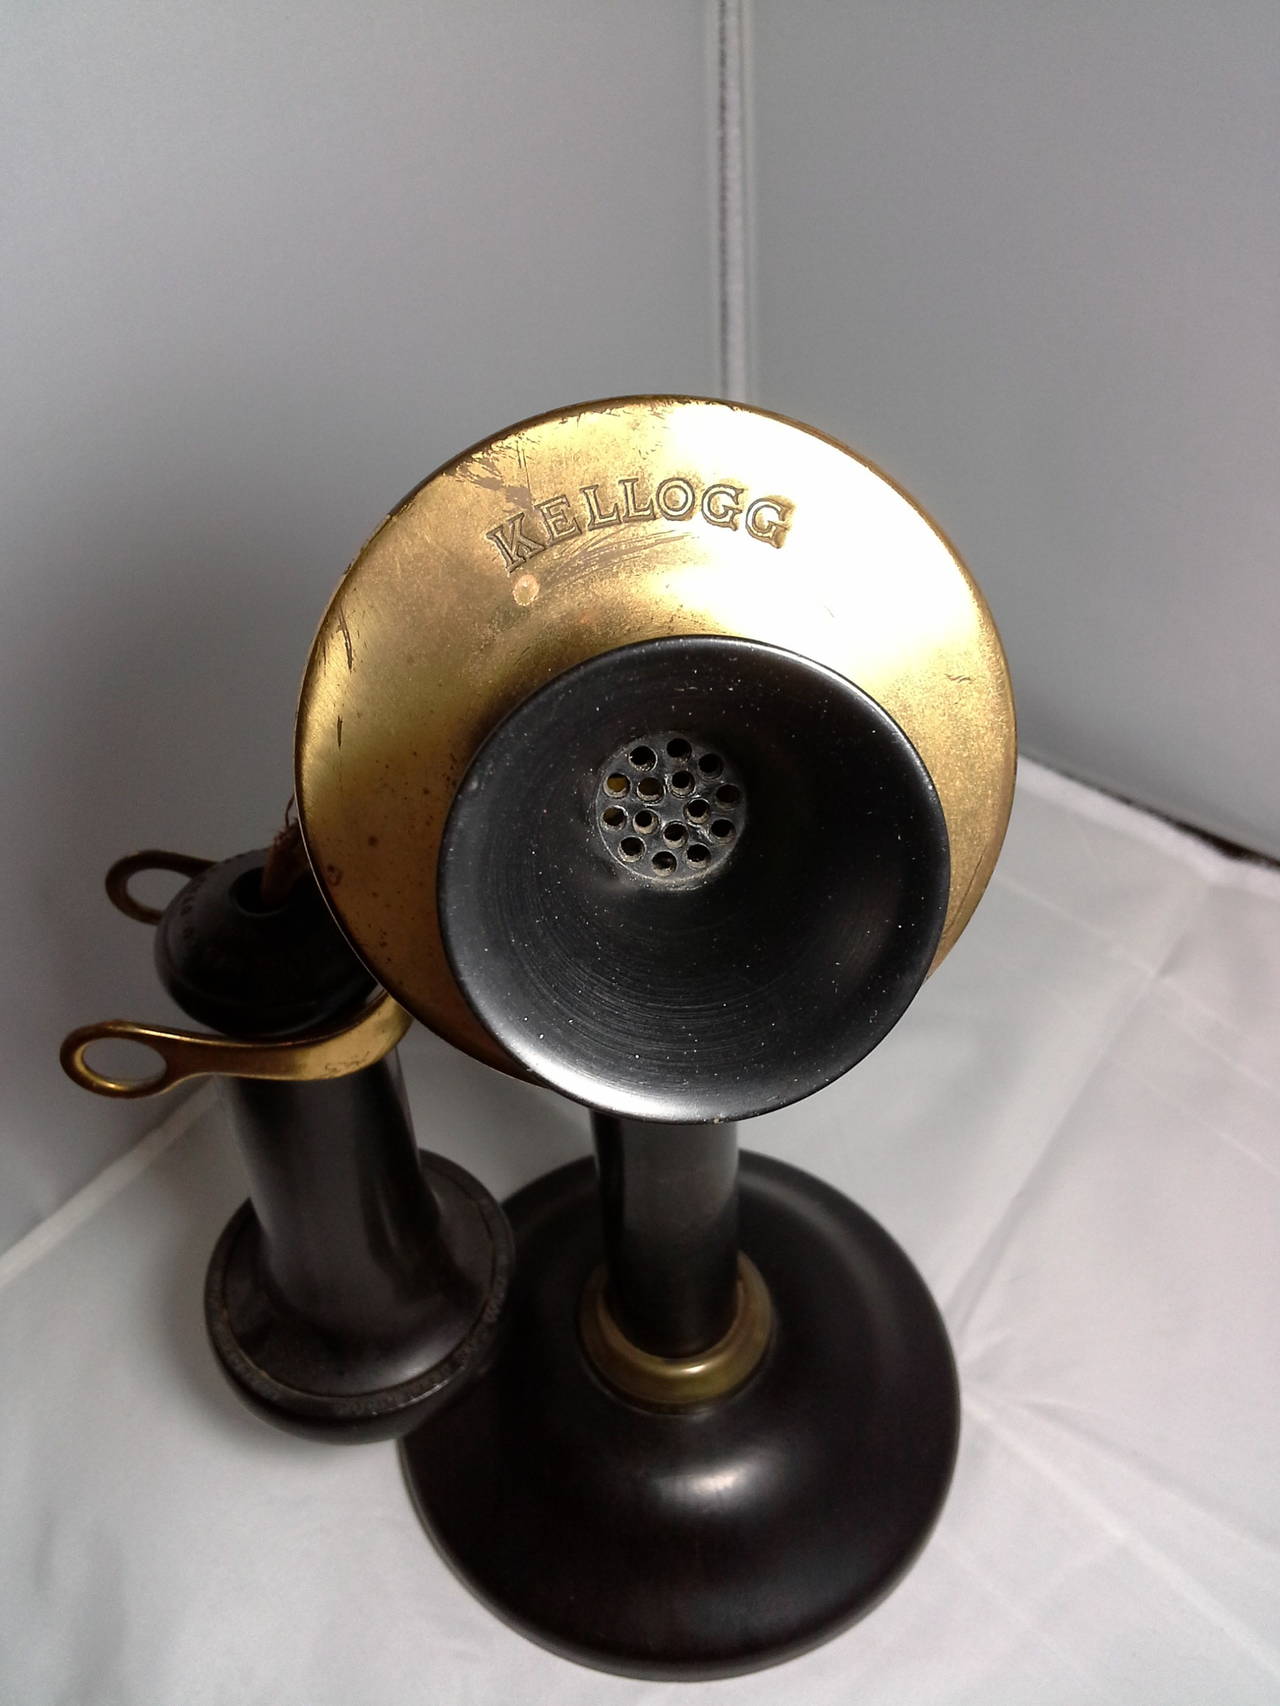 American Kellogg Chicago Candlestick Brass and Bakelite, Patented 1901